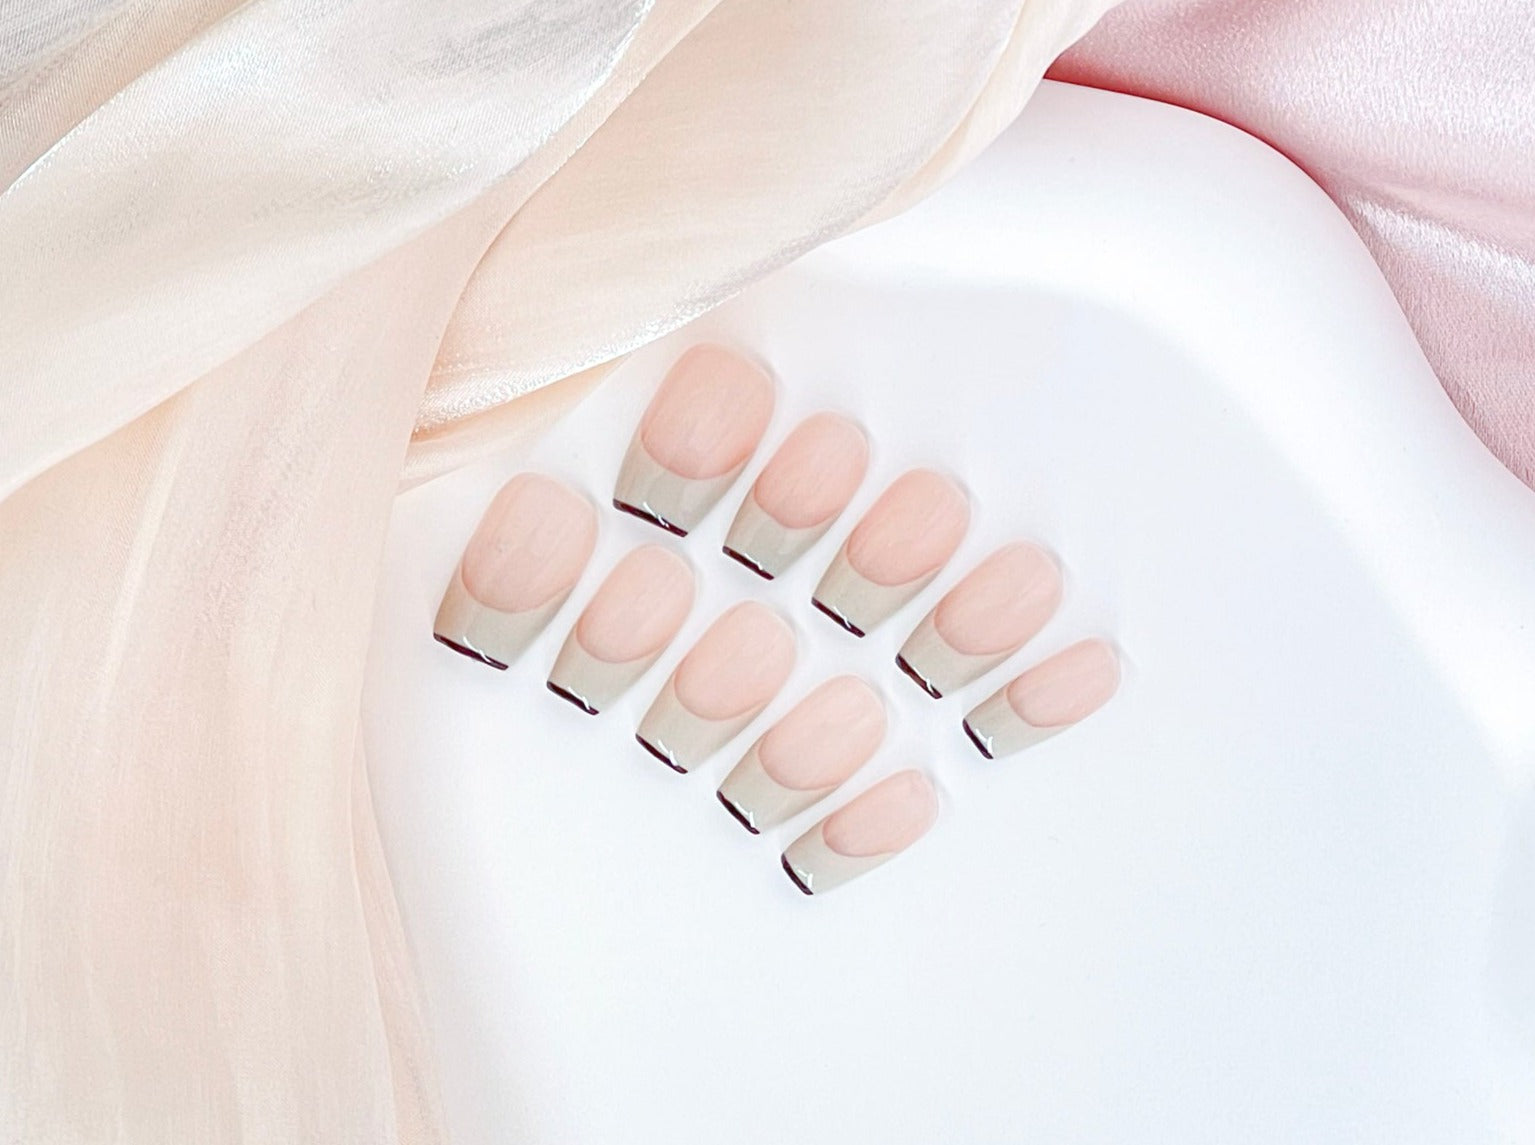 Manicure: In the ever-evolving world of beauty, the debate be